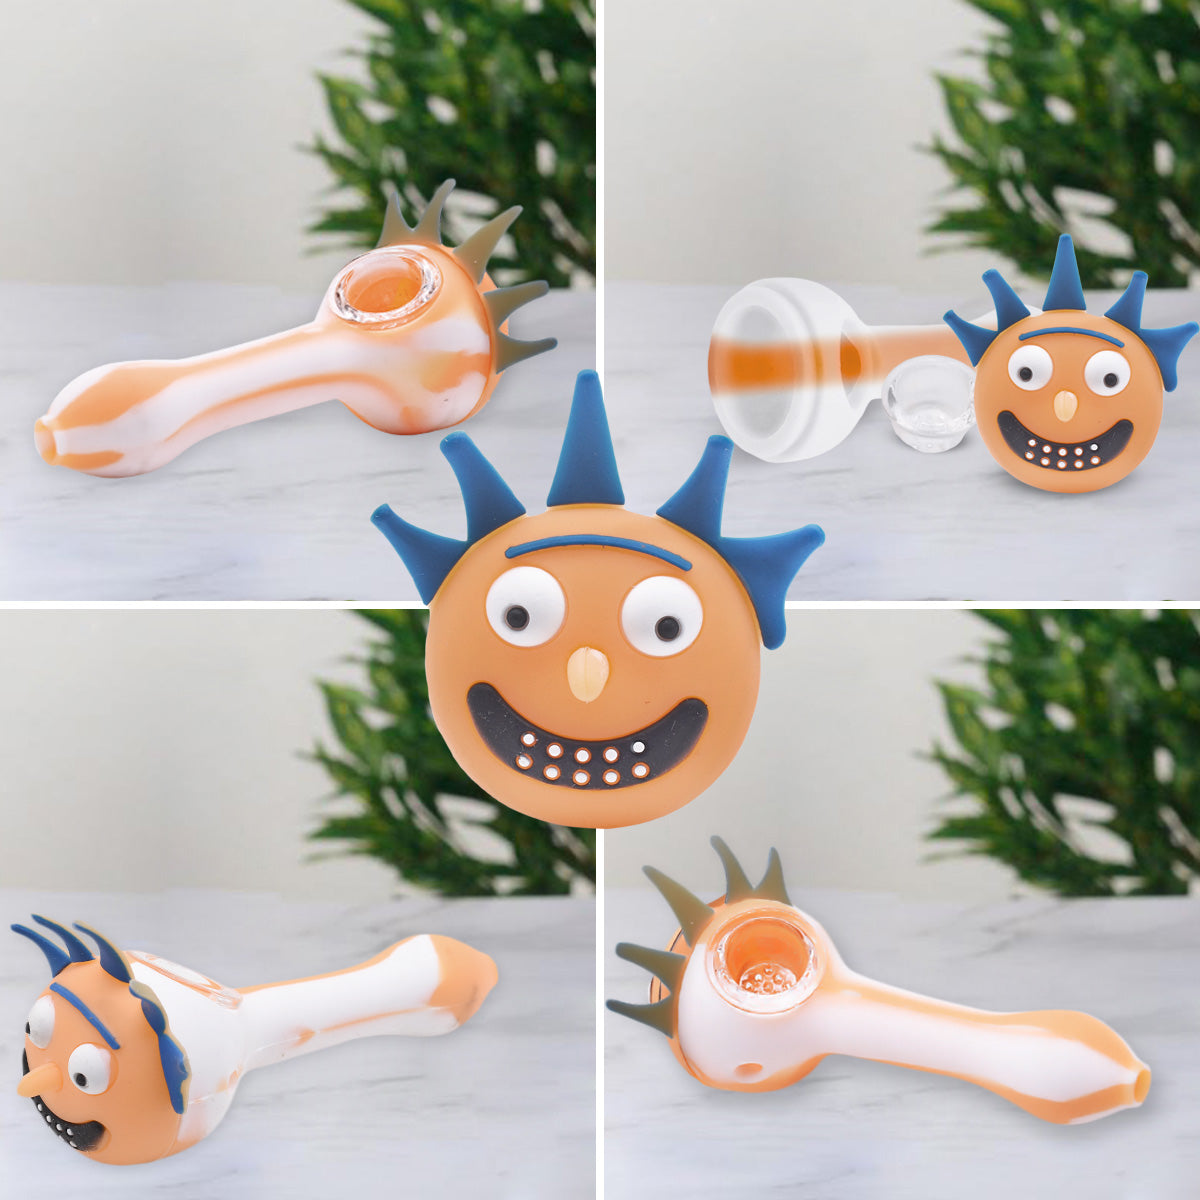 Silicone Smoking Pipe, Unbreakable with Glass Bowl, Rick Morty-2, White